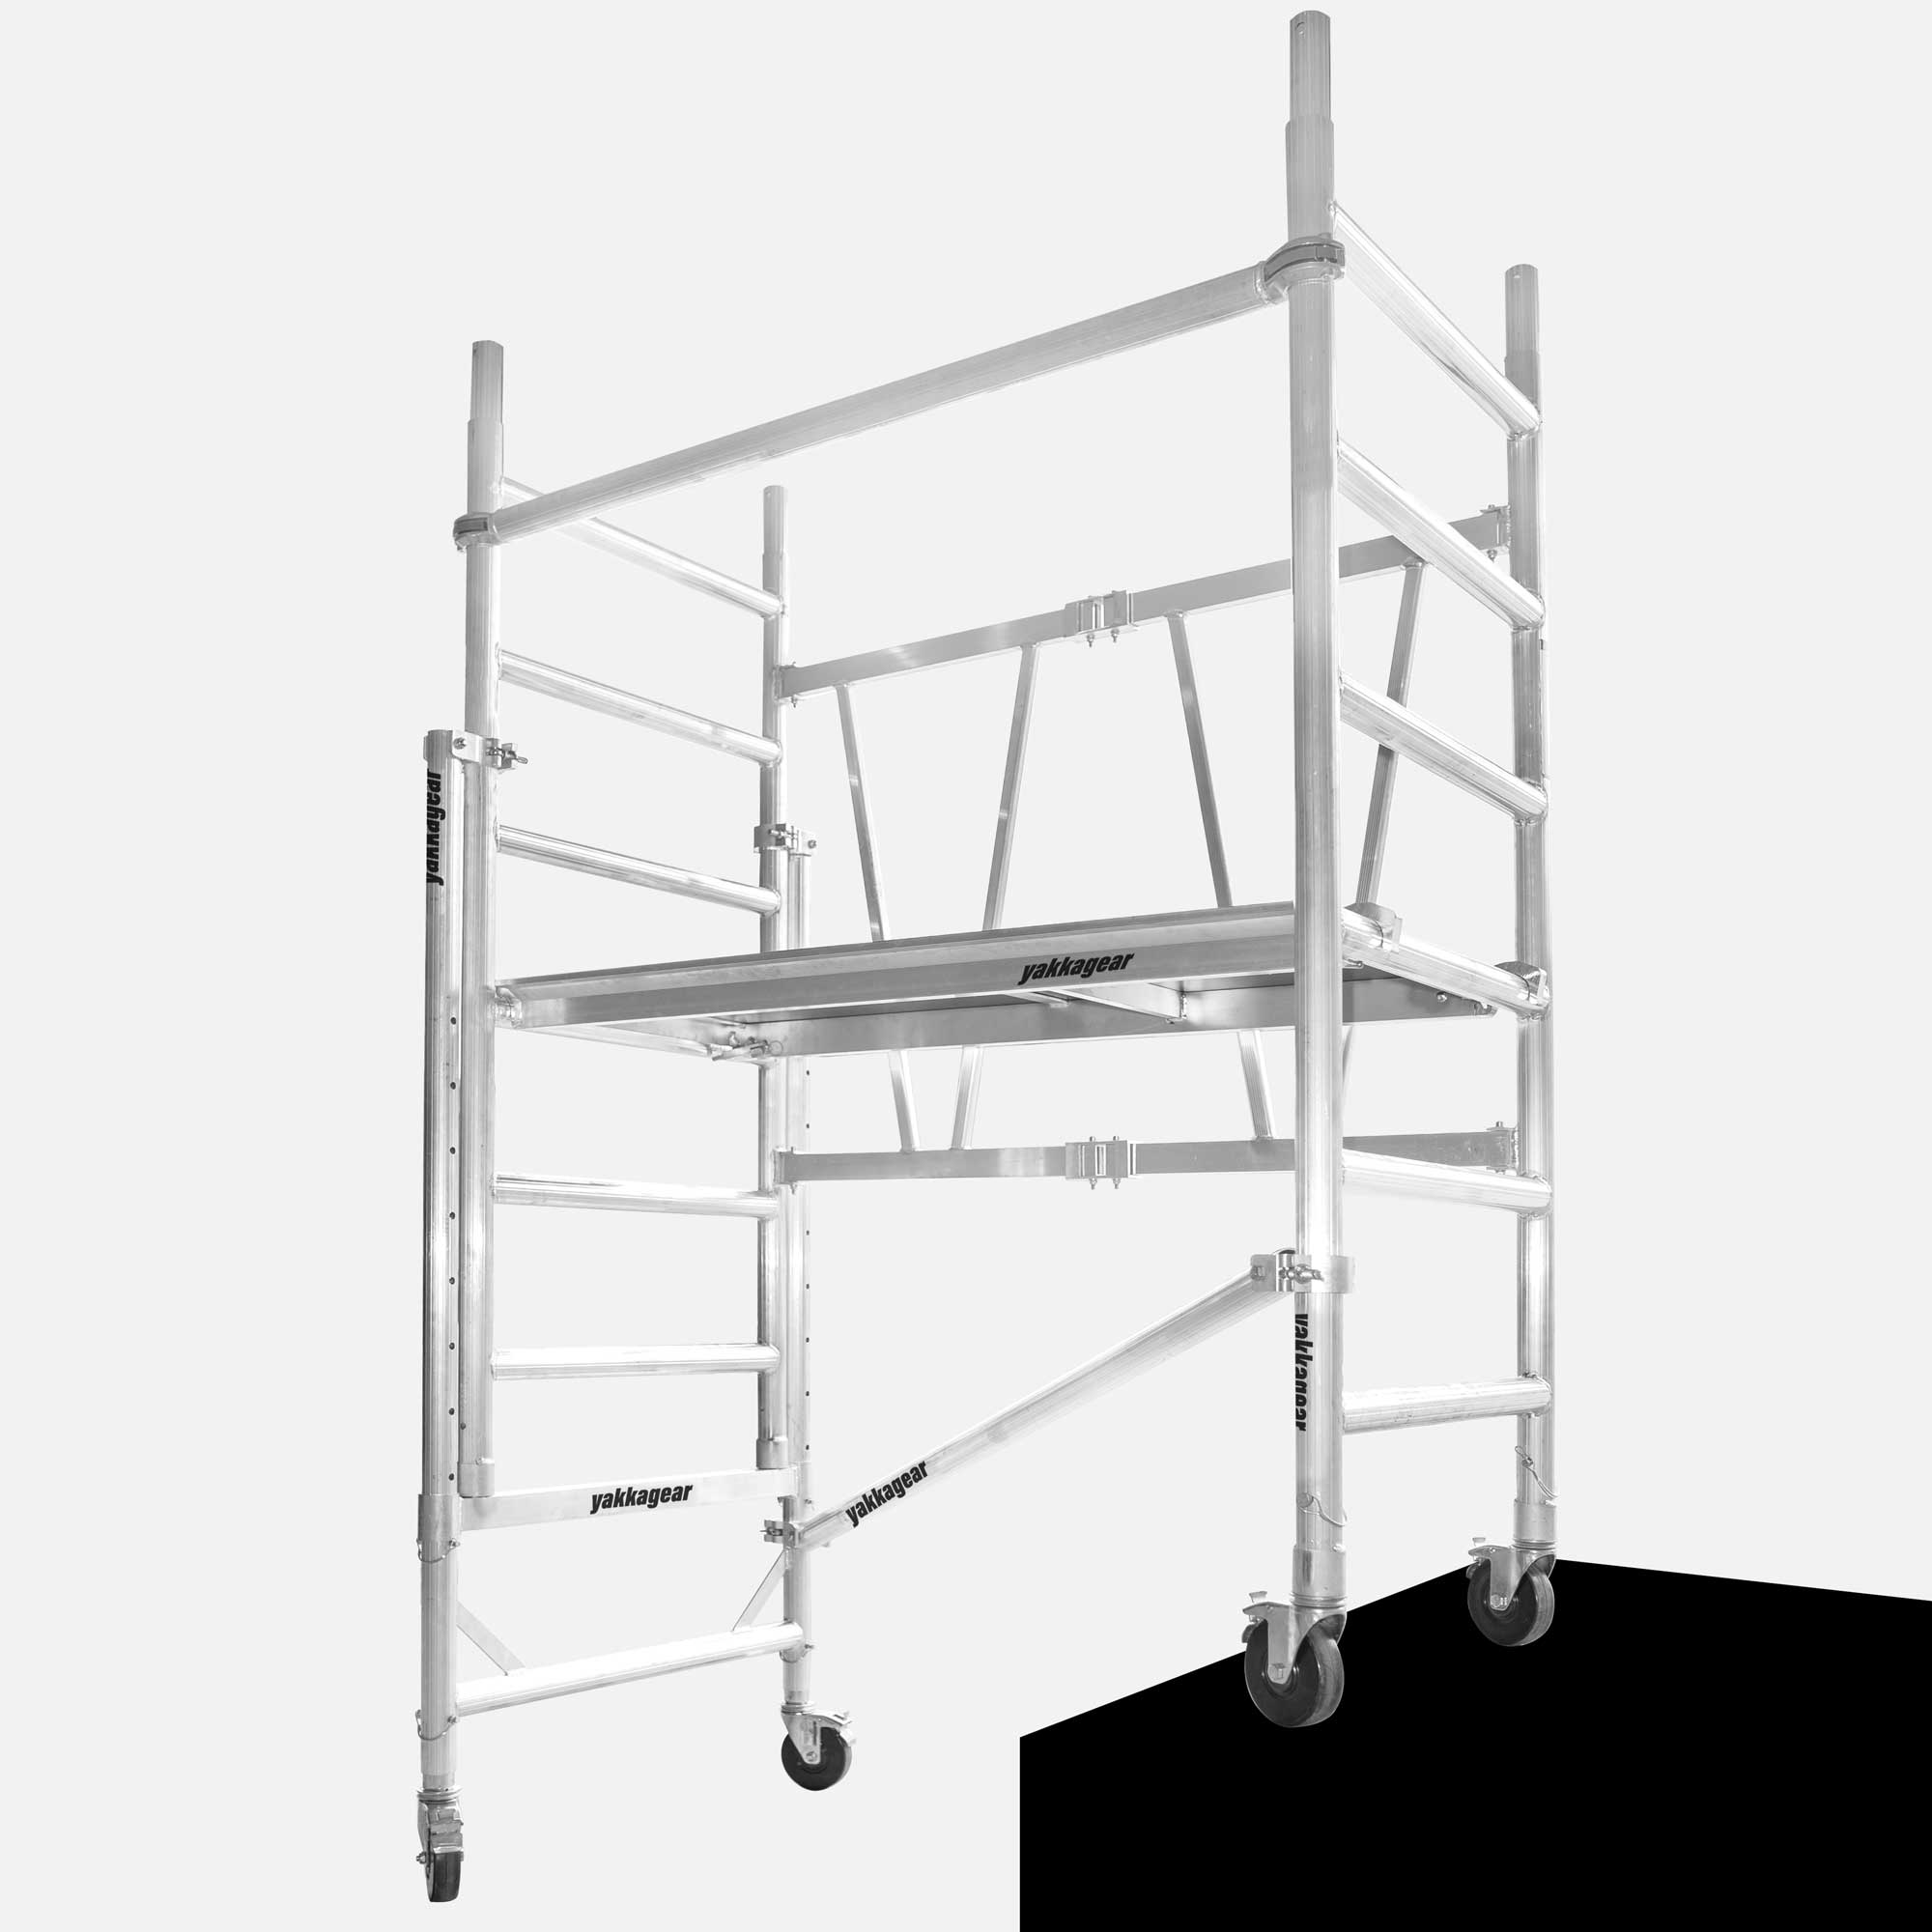 Yakka Gear Australia Adjustable Stairs toolkit used on 1.44m Length x 0.74m Width compact scaffolding tower as access equipment, with working platform heights ranging from 1.2m to 3.9m and reach between 3.25m to 6m, zoomed in detailed view of the stairs toolkit with the rest of the scaffold, with white background. 